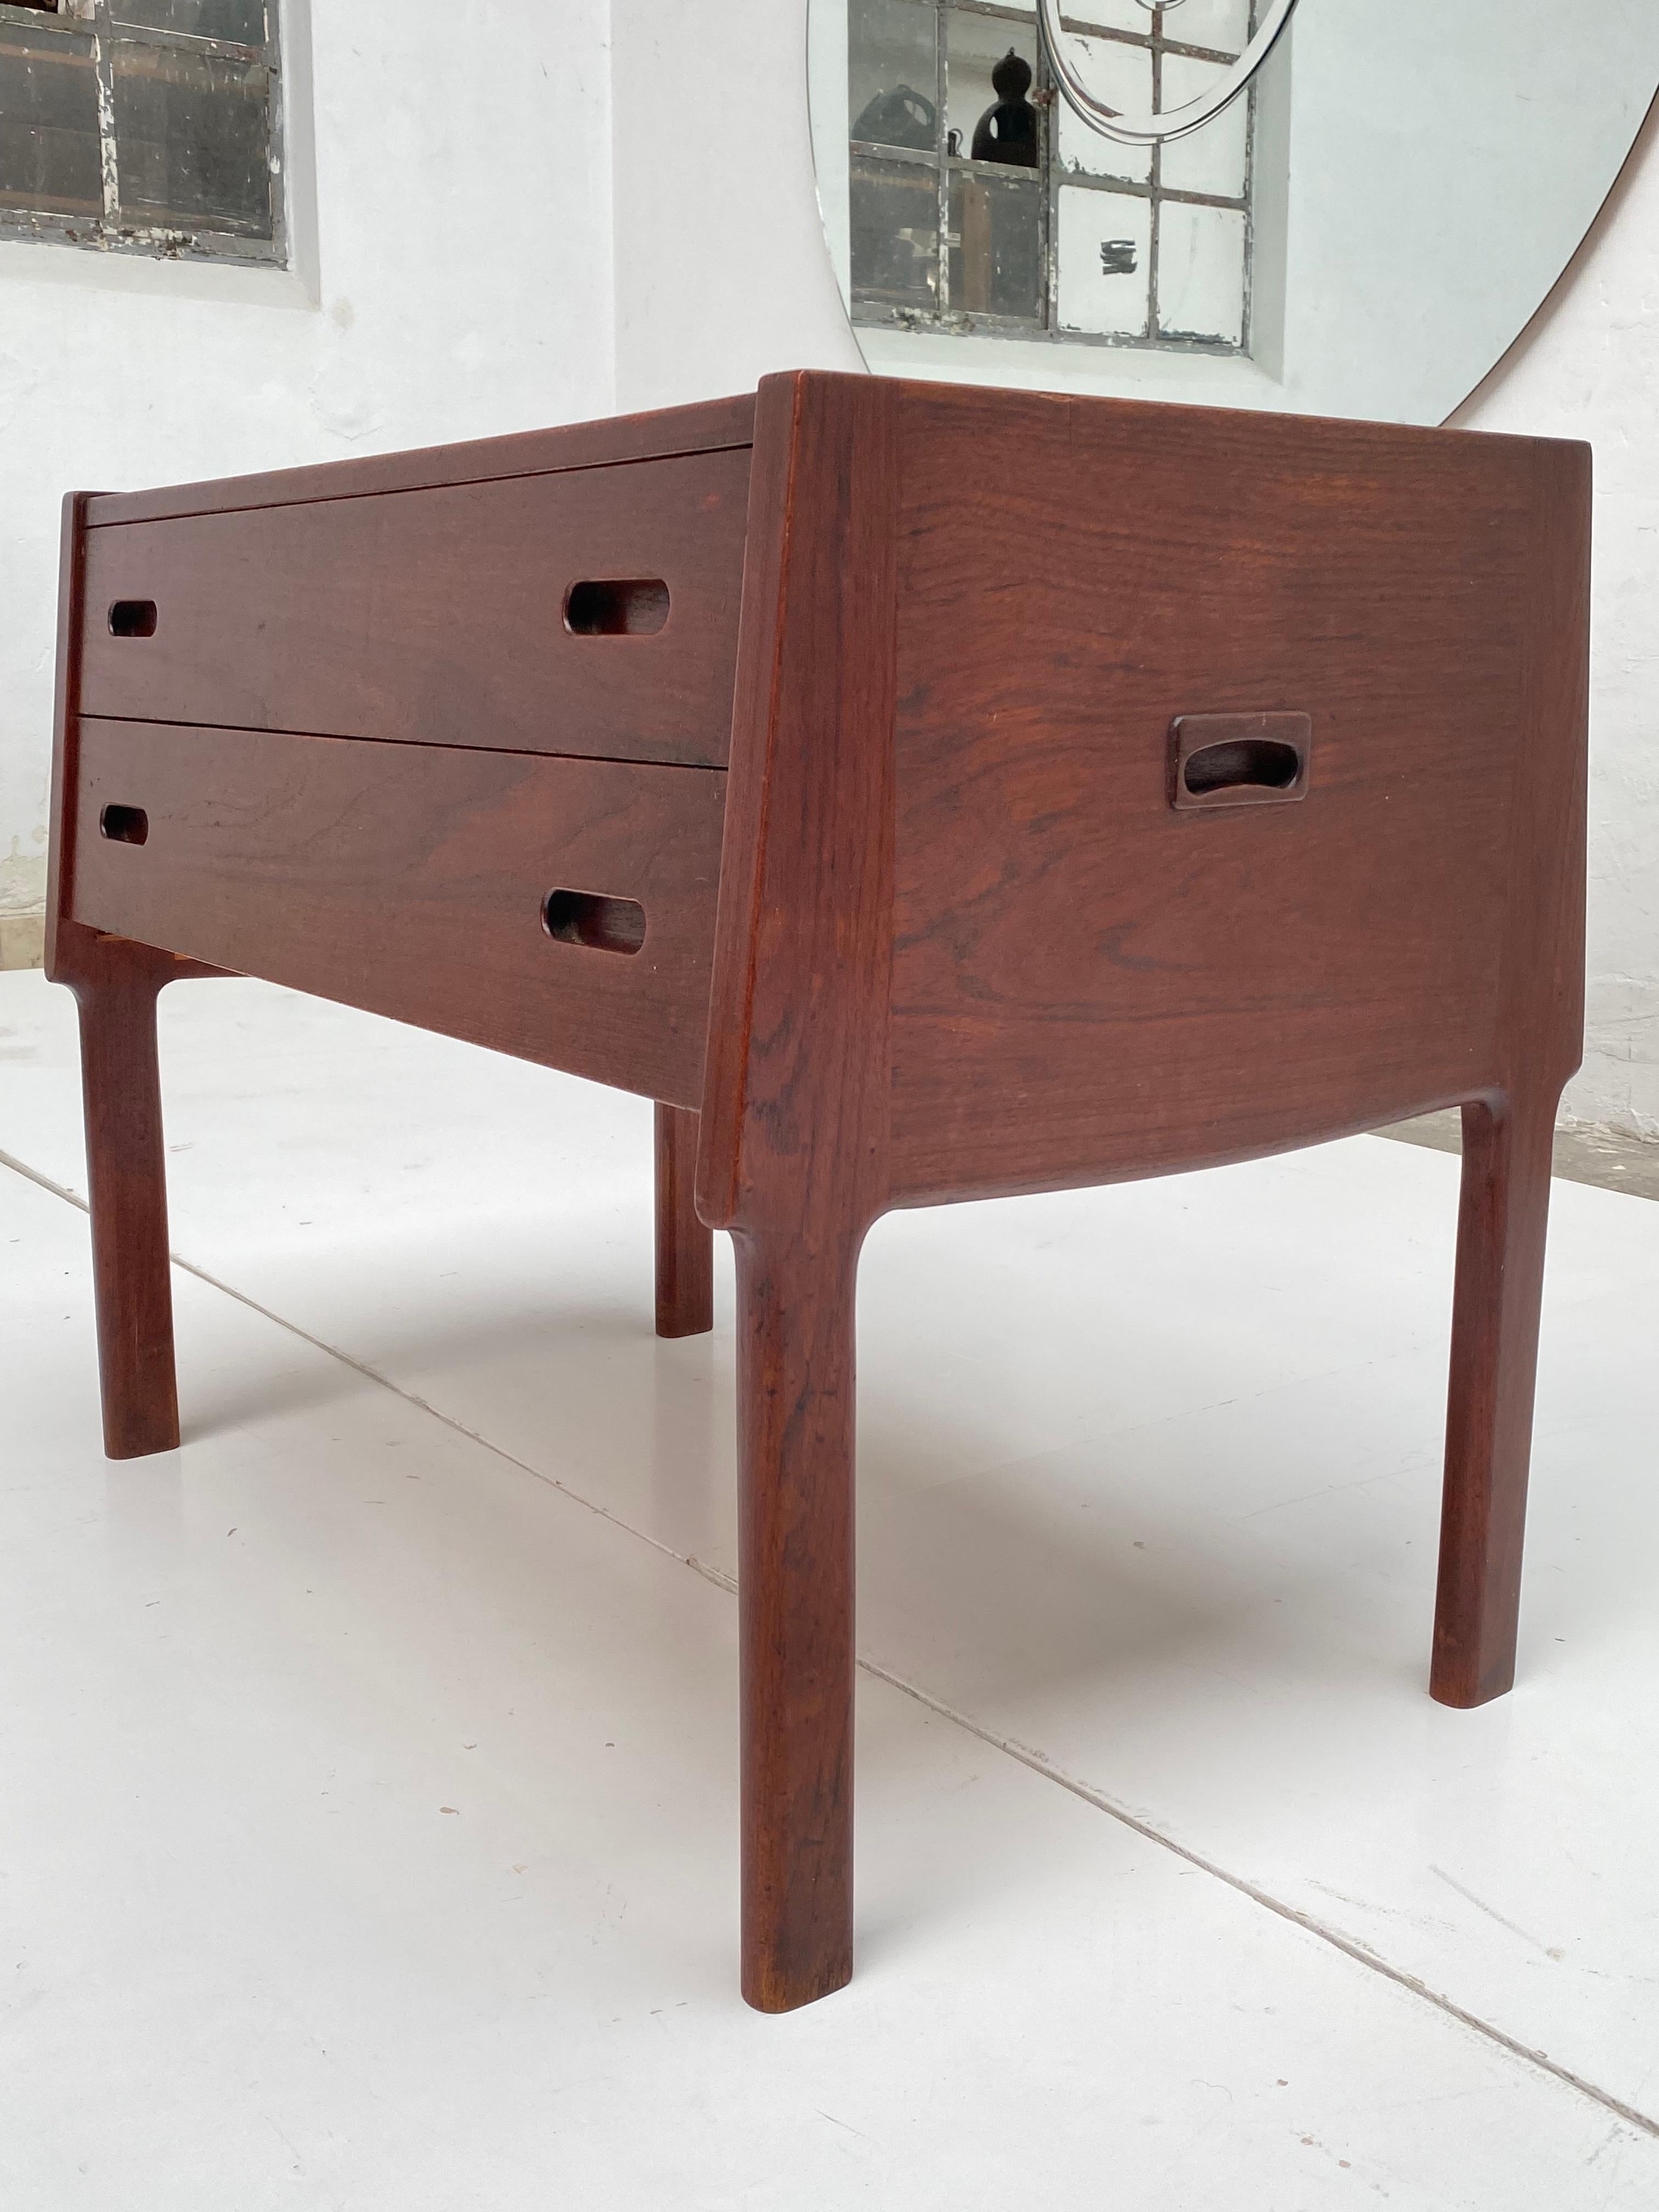 Very beautifully executed Teak compact cupboard from Denmark

The cupboard has 2 functional spacious drawers with double handles
The top drawer has a sewing material layout and can be easily pulled out to be stored on top of the cabinet for a goof